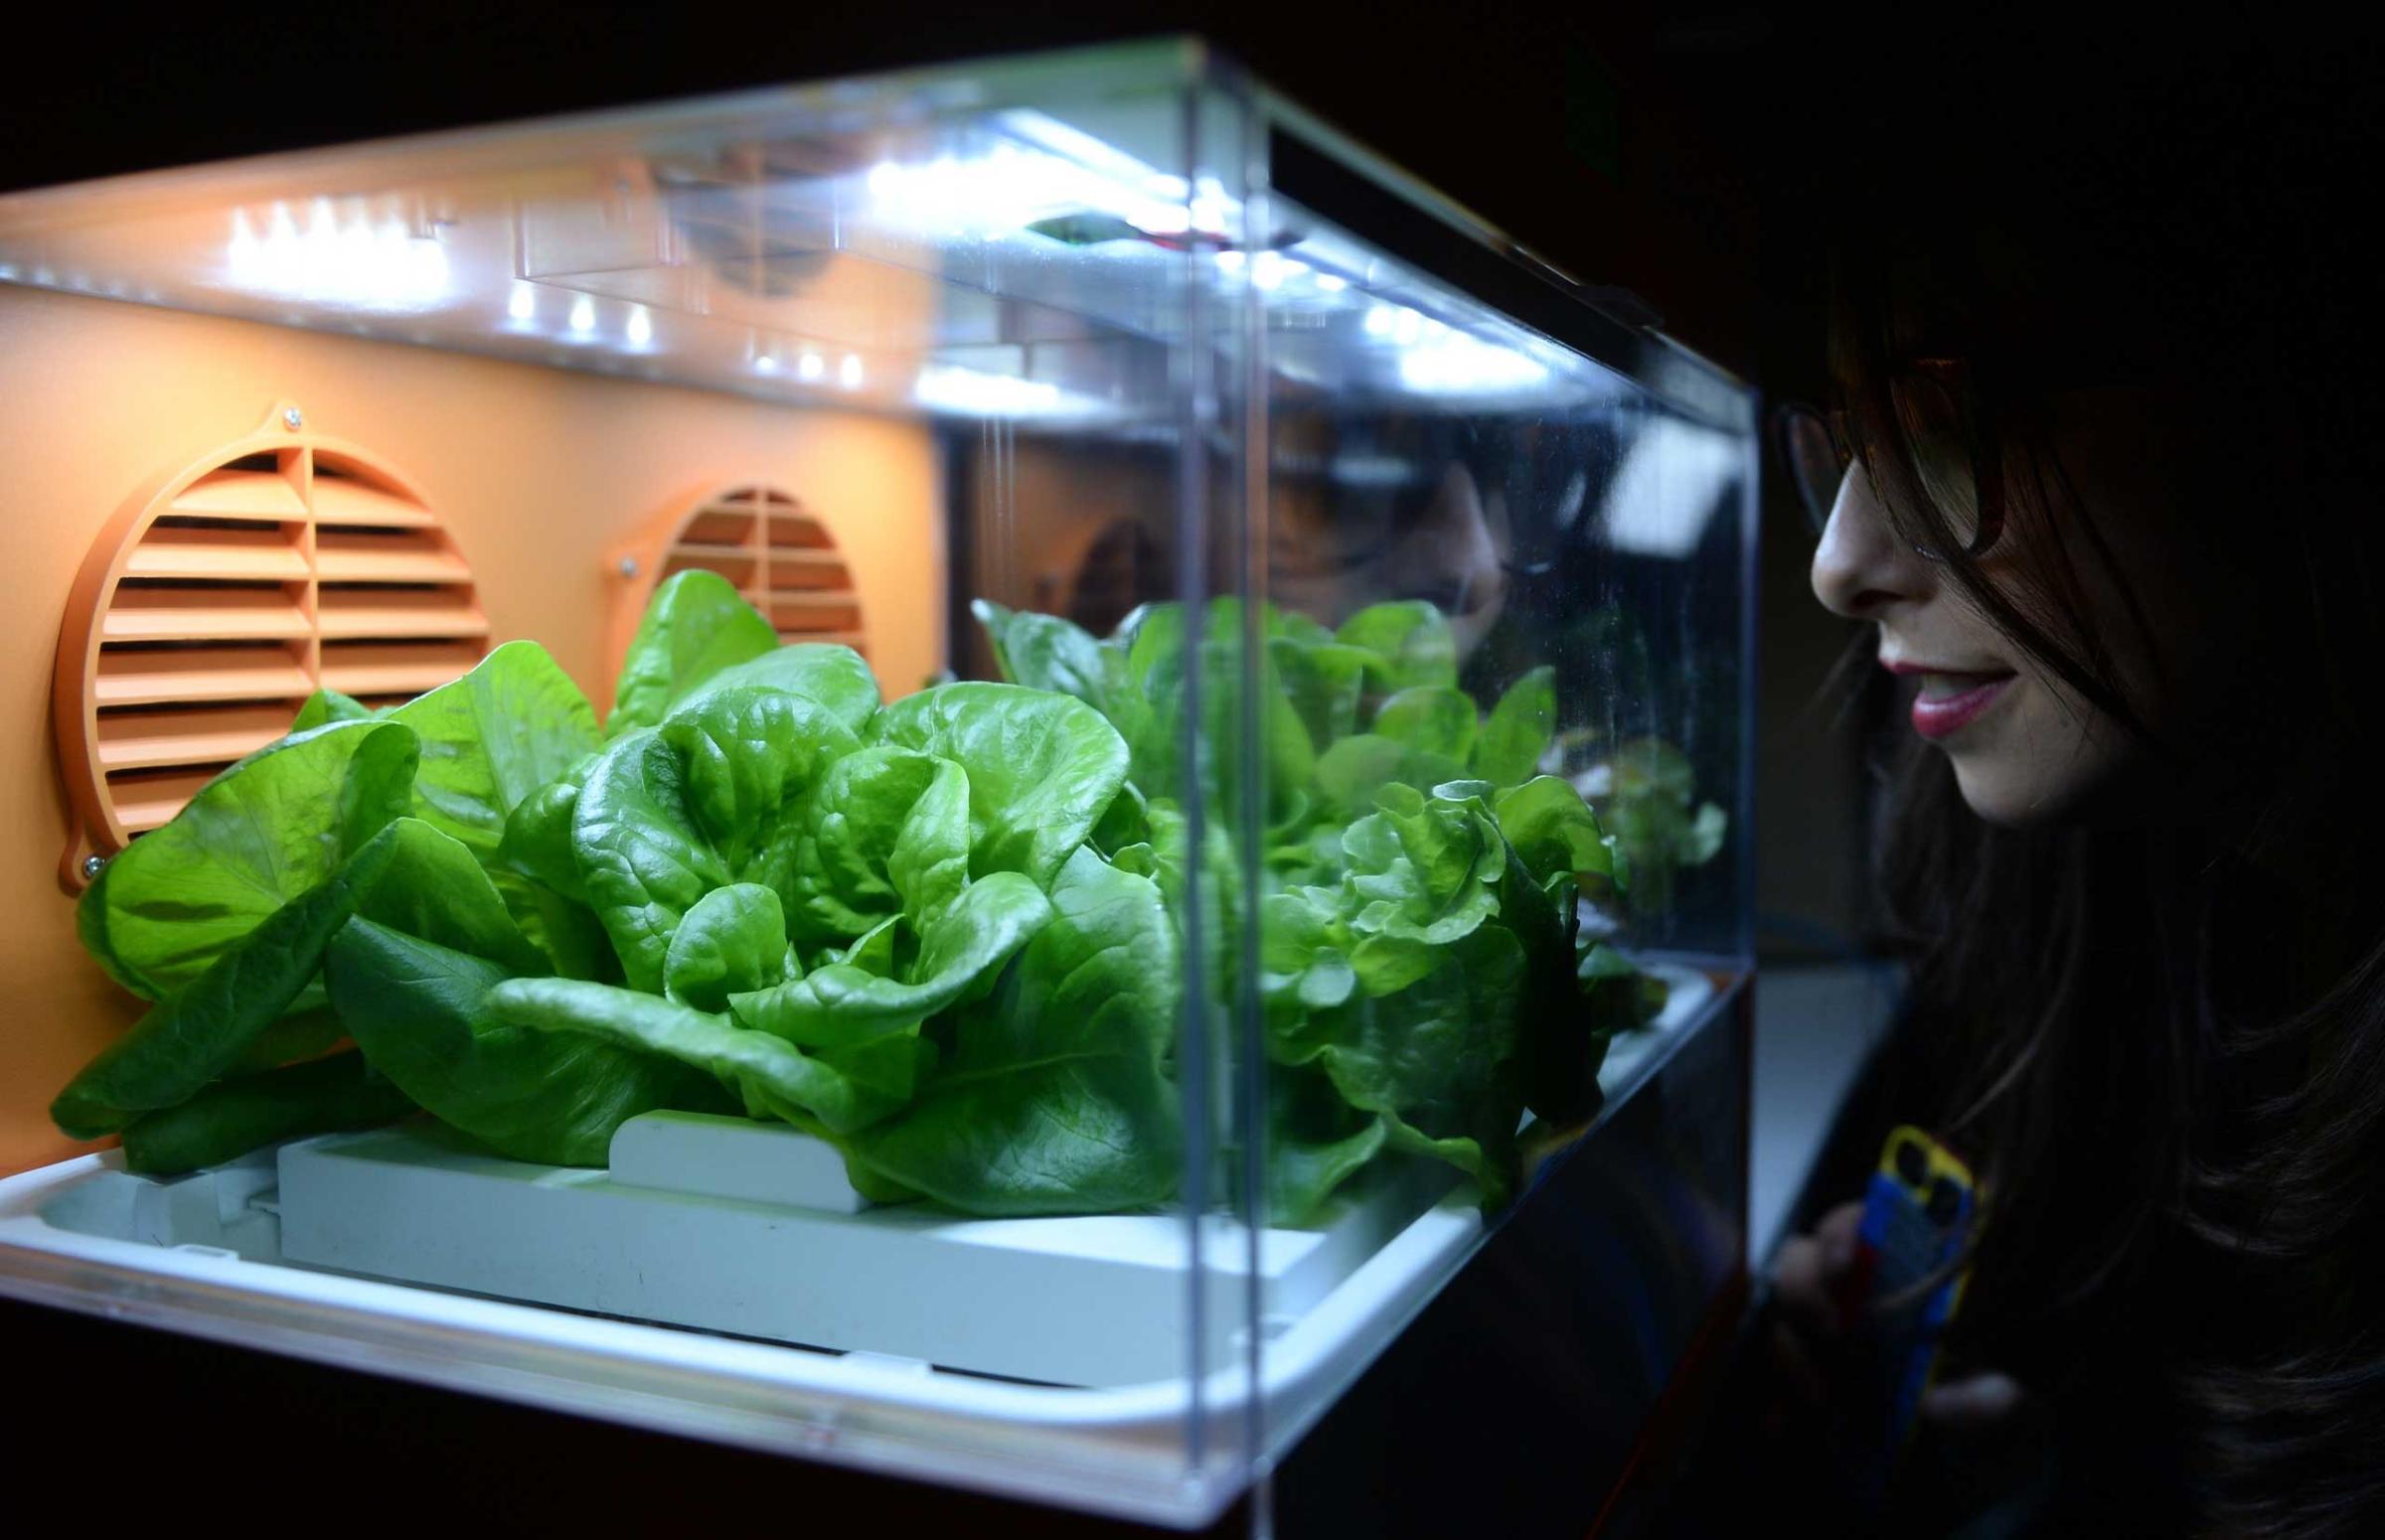 At the 'Unveiled-event' a young woman has a look at salad at the CES electronics and consumer technology tradeshow in Las Vegas on Jan. 4, 2015.